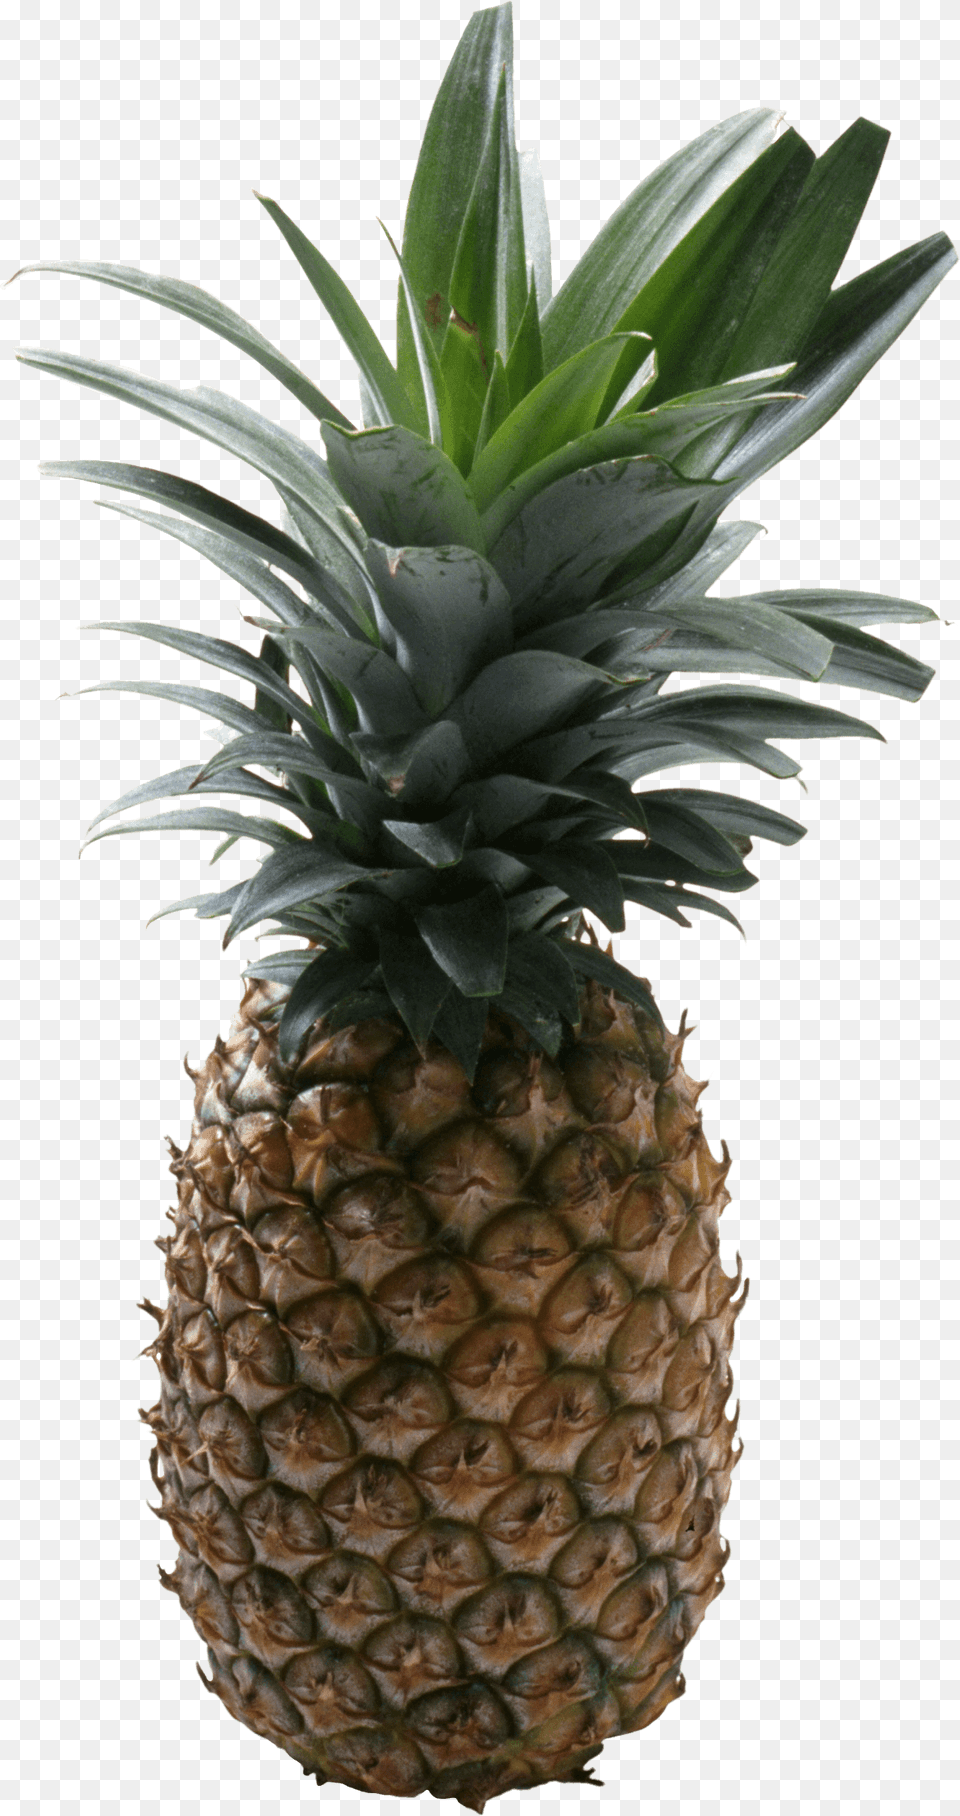 Pineapple No Background Pineapple With No Background, Food, Fruit, Plant, Produce Free Png